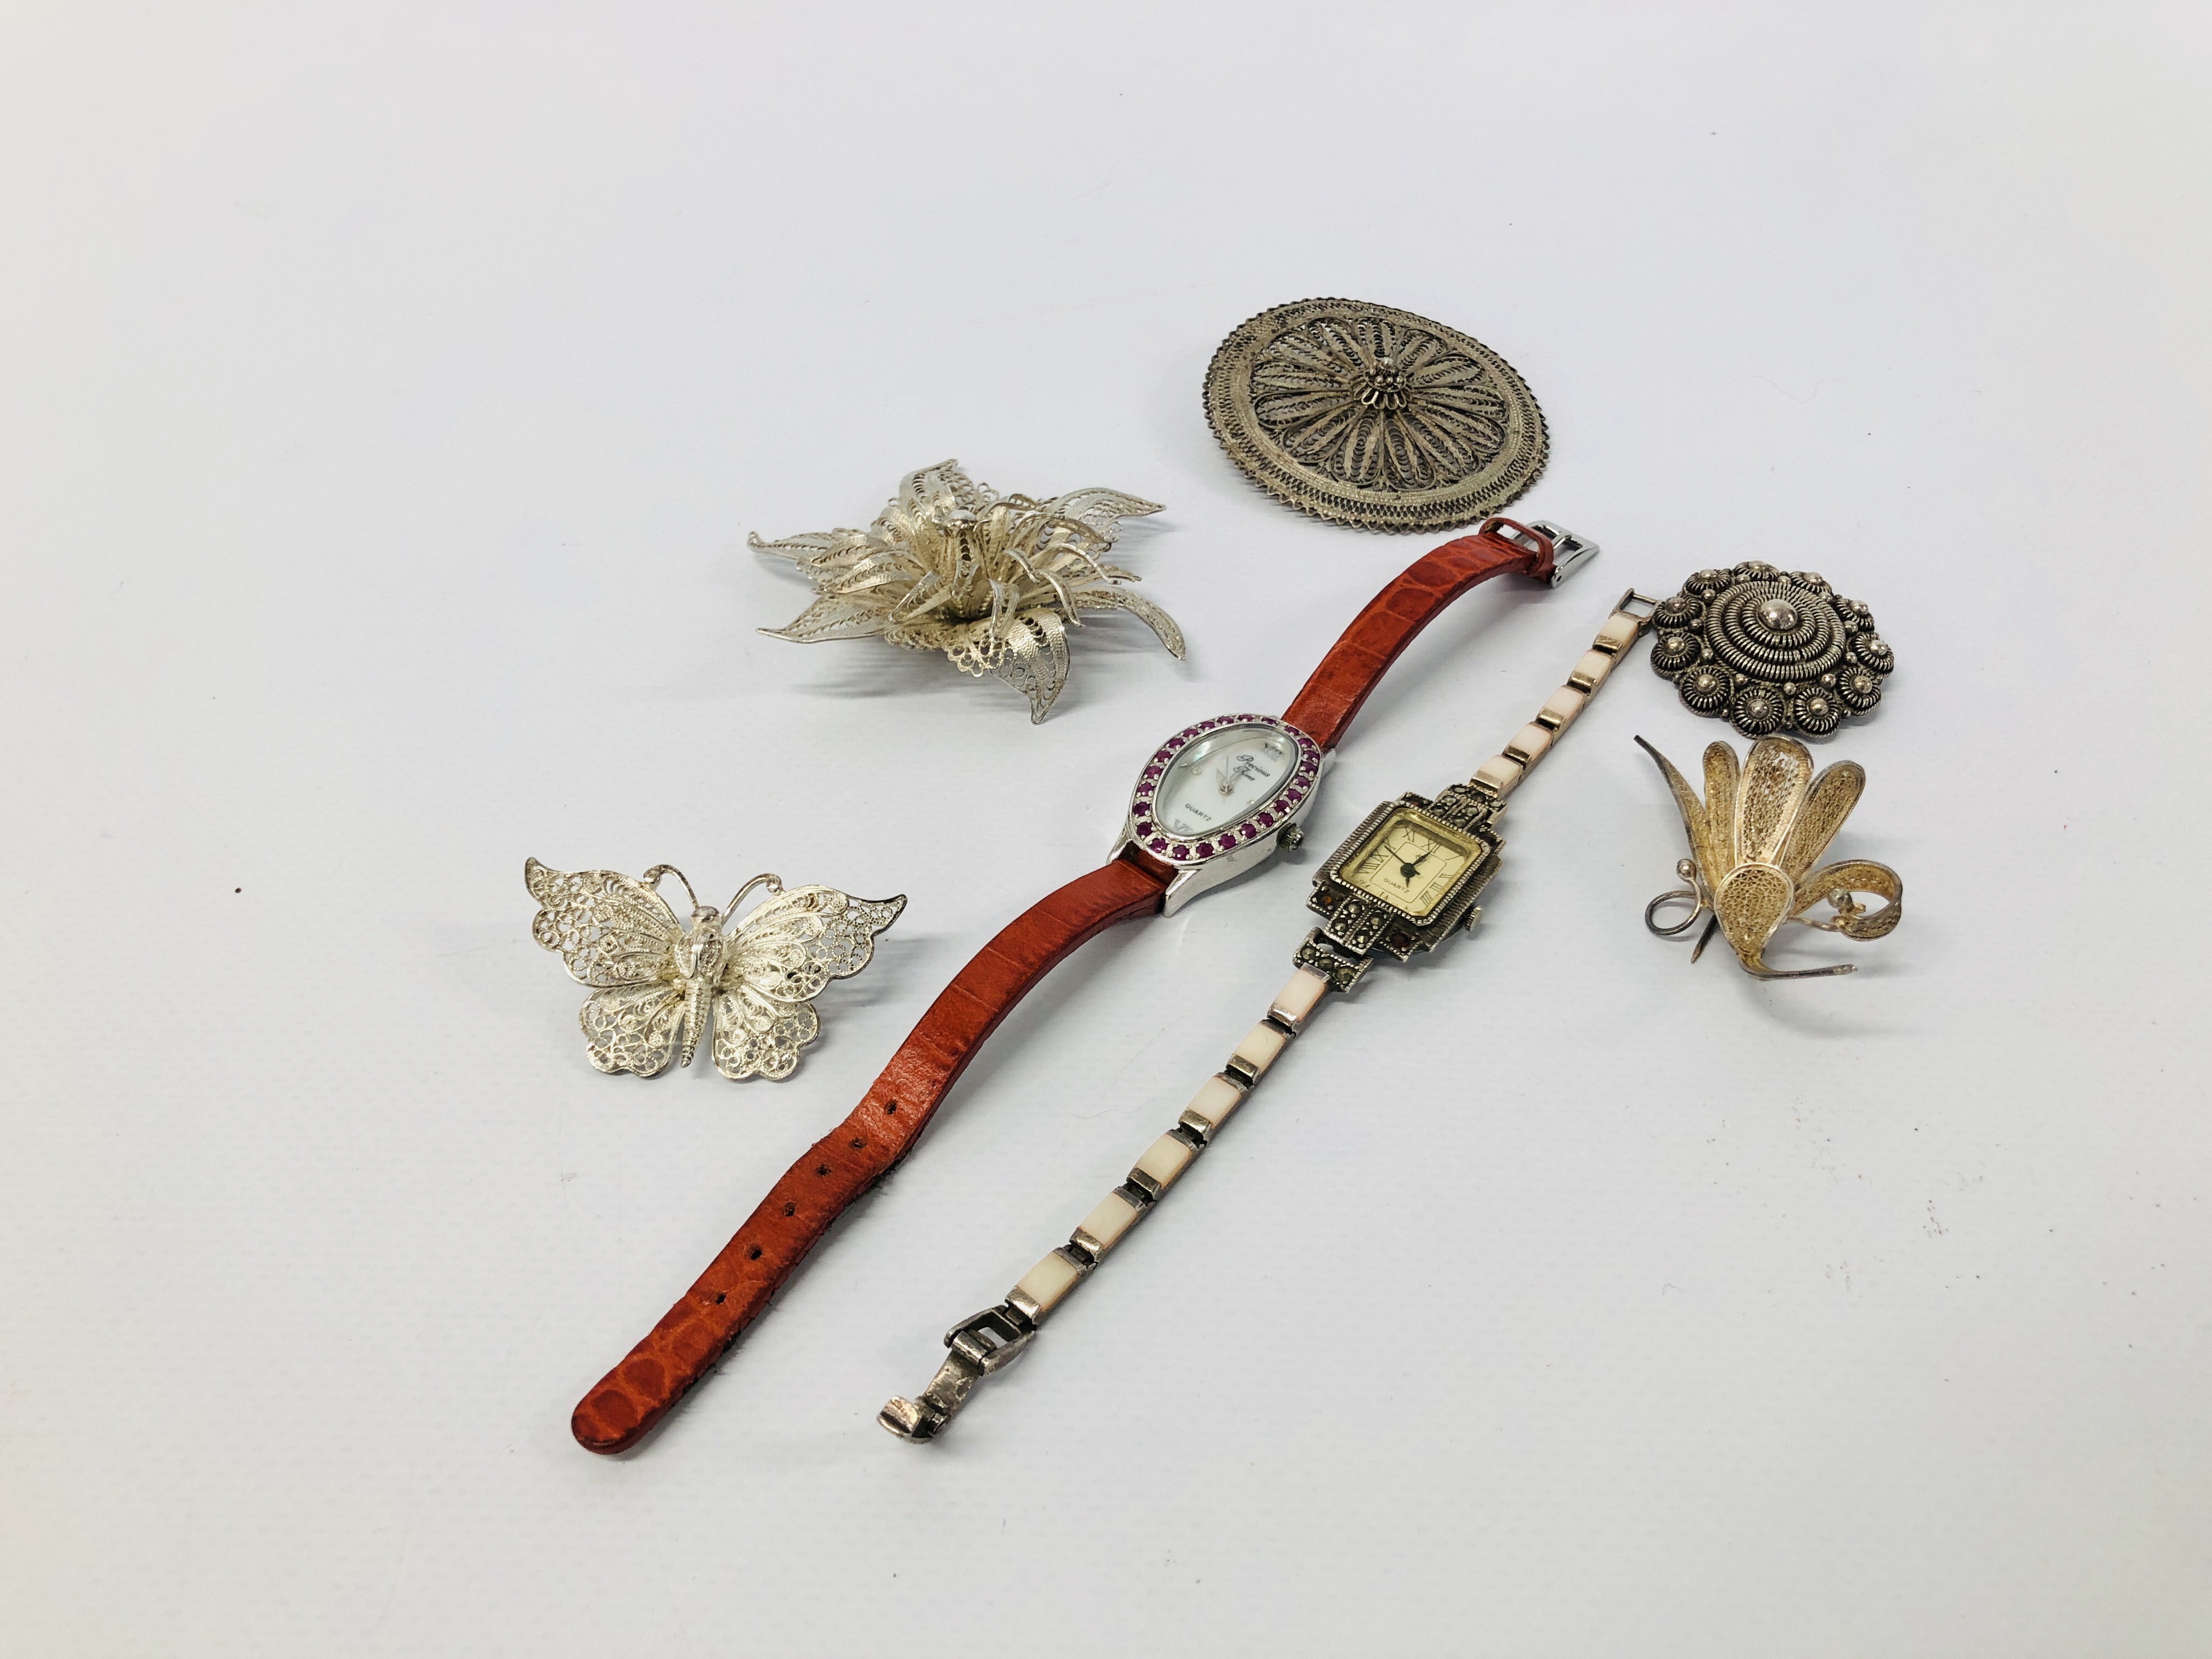 VINTAGE WHITE METAL FILAGREE BROOCHES (5) AND SILVER VINTAGE QUARTZ WATCHES SET WITH MARCASITES +